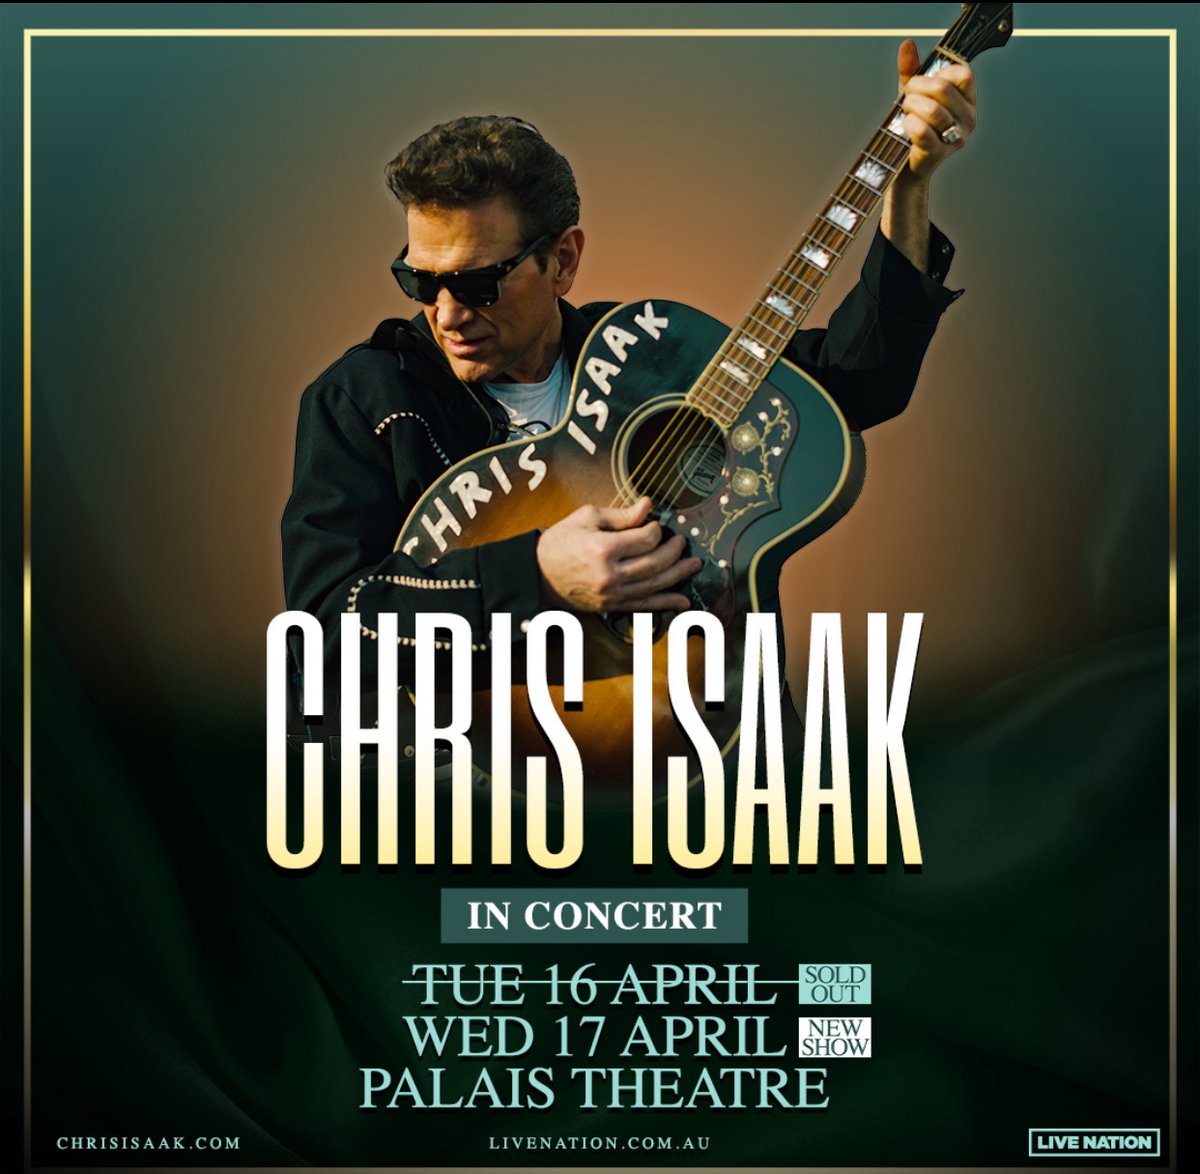 MELBOURNE! We just added a second show at @PalaisTheatre on 17 April. We can't wait to see you. Grab your tickets now: ticketmaster.com.au/event/13006036…